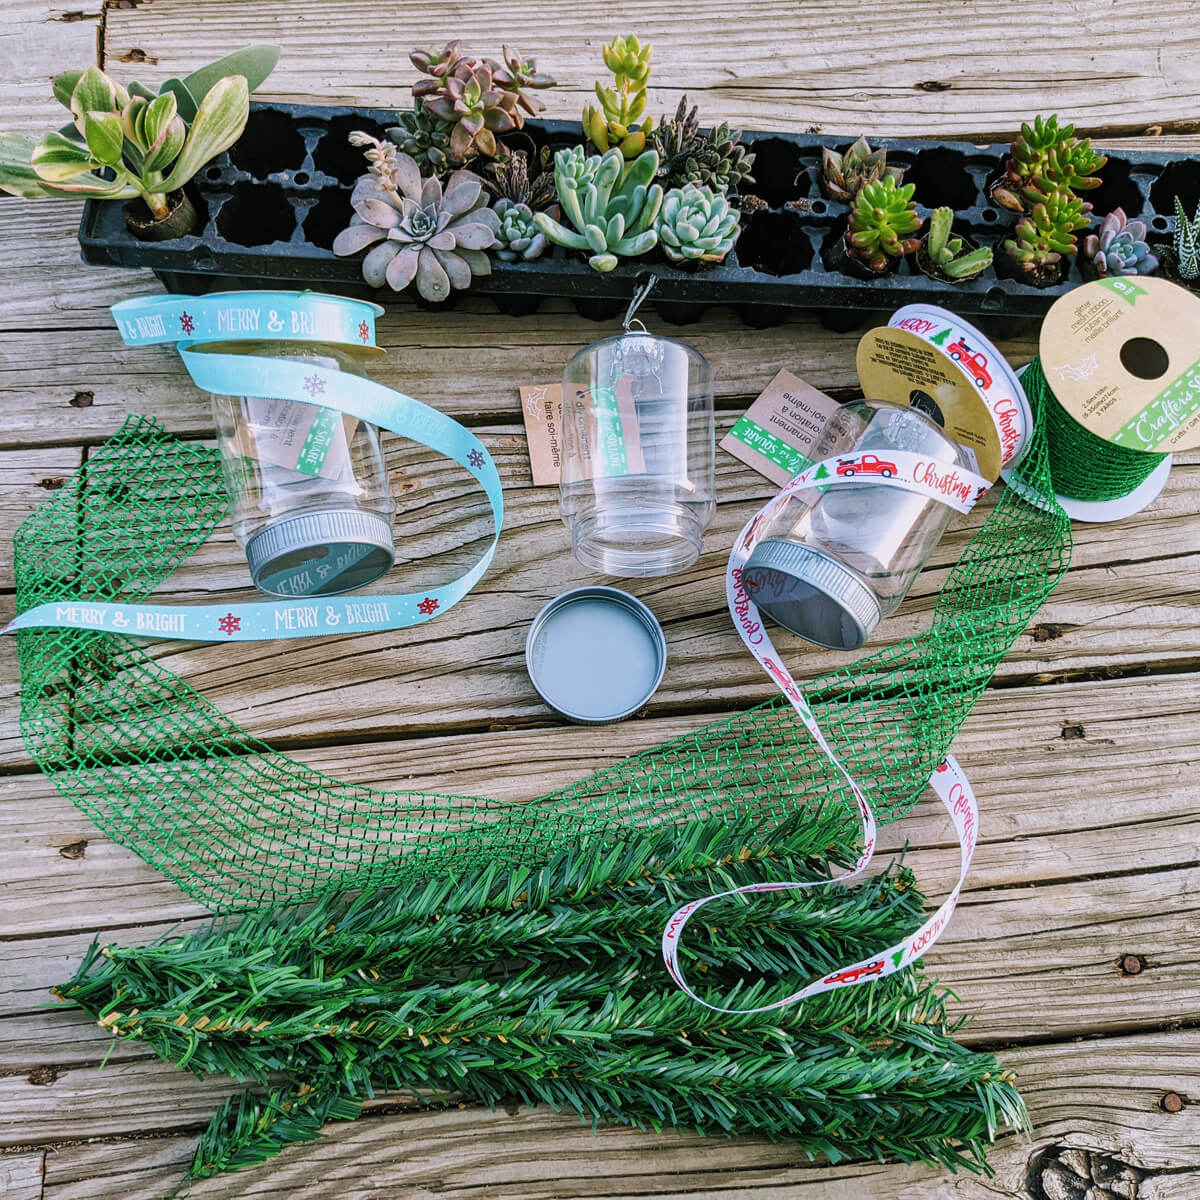 Materials for Homemade Holiday Ornament with Live Plants from Dollar Tree and Glick's Greenhouse